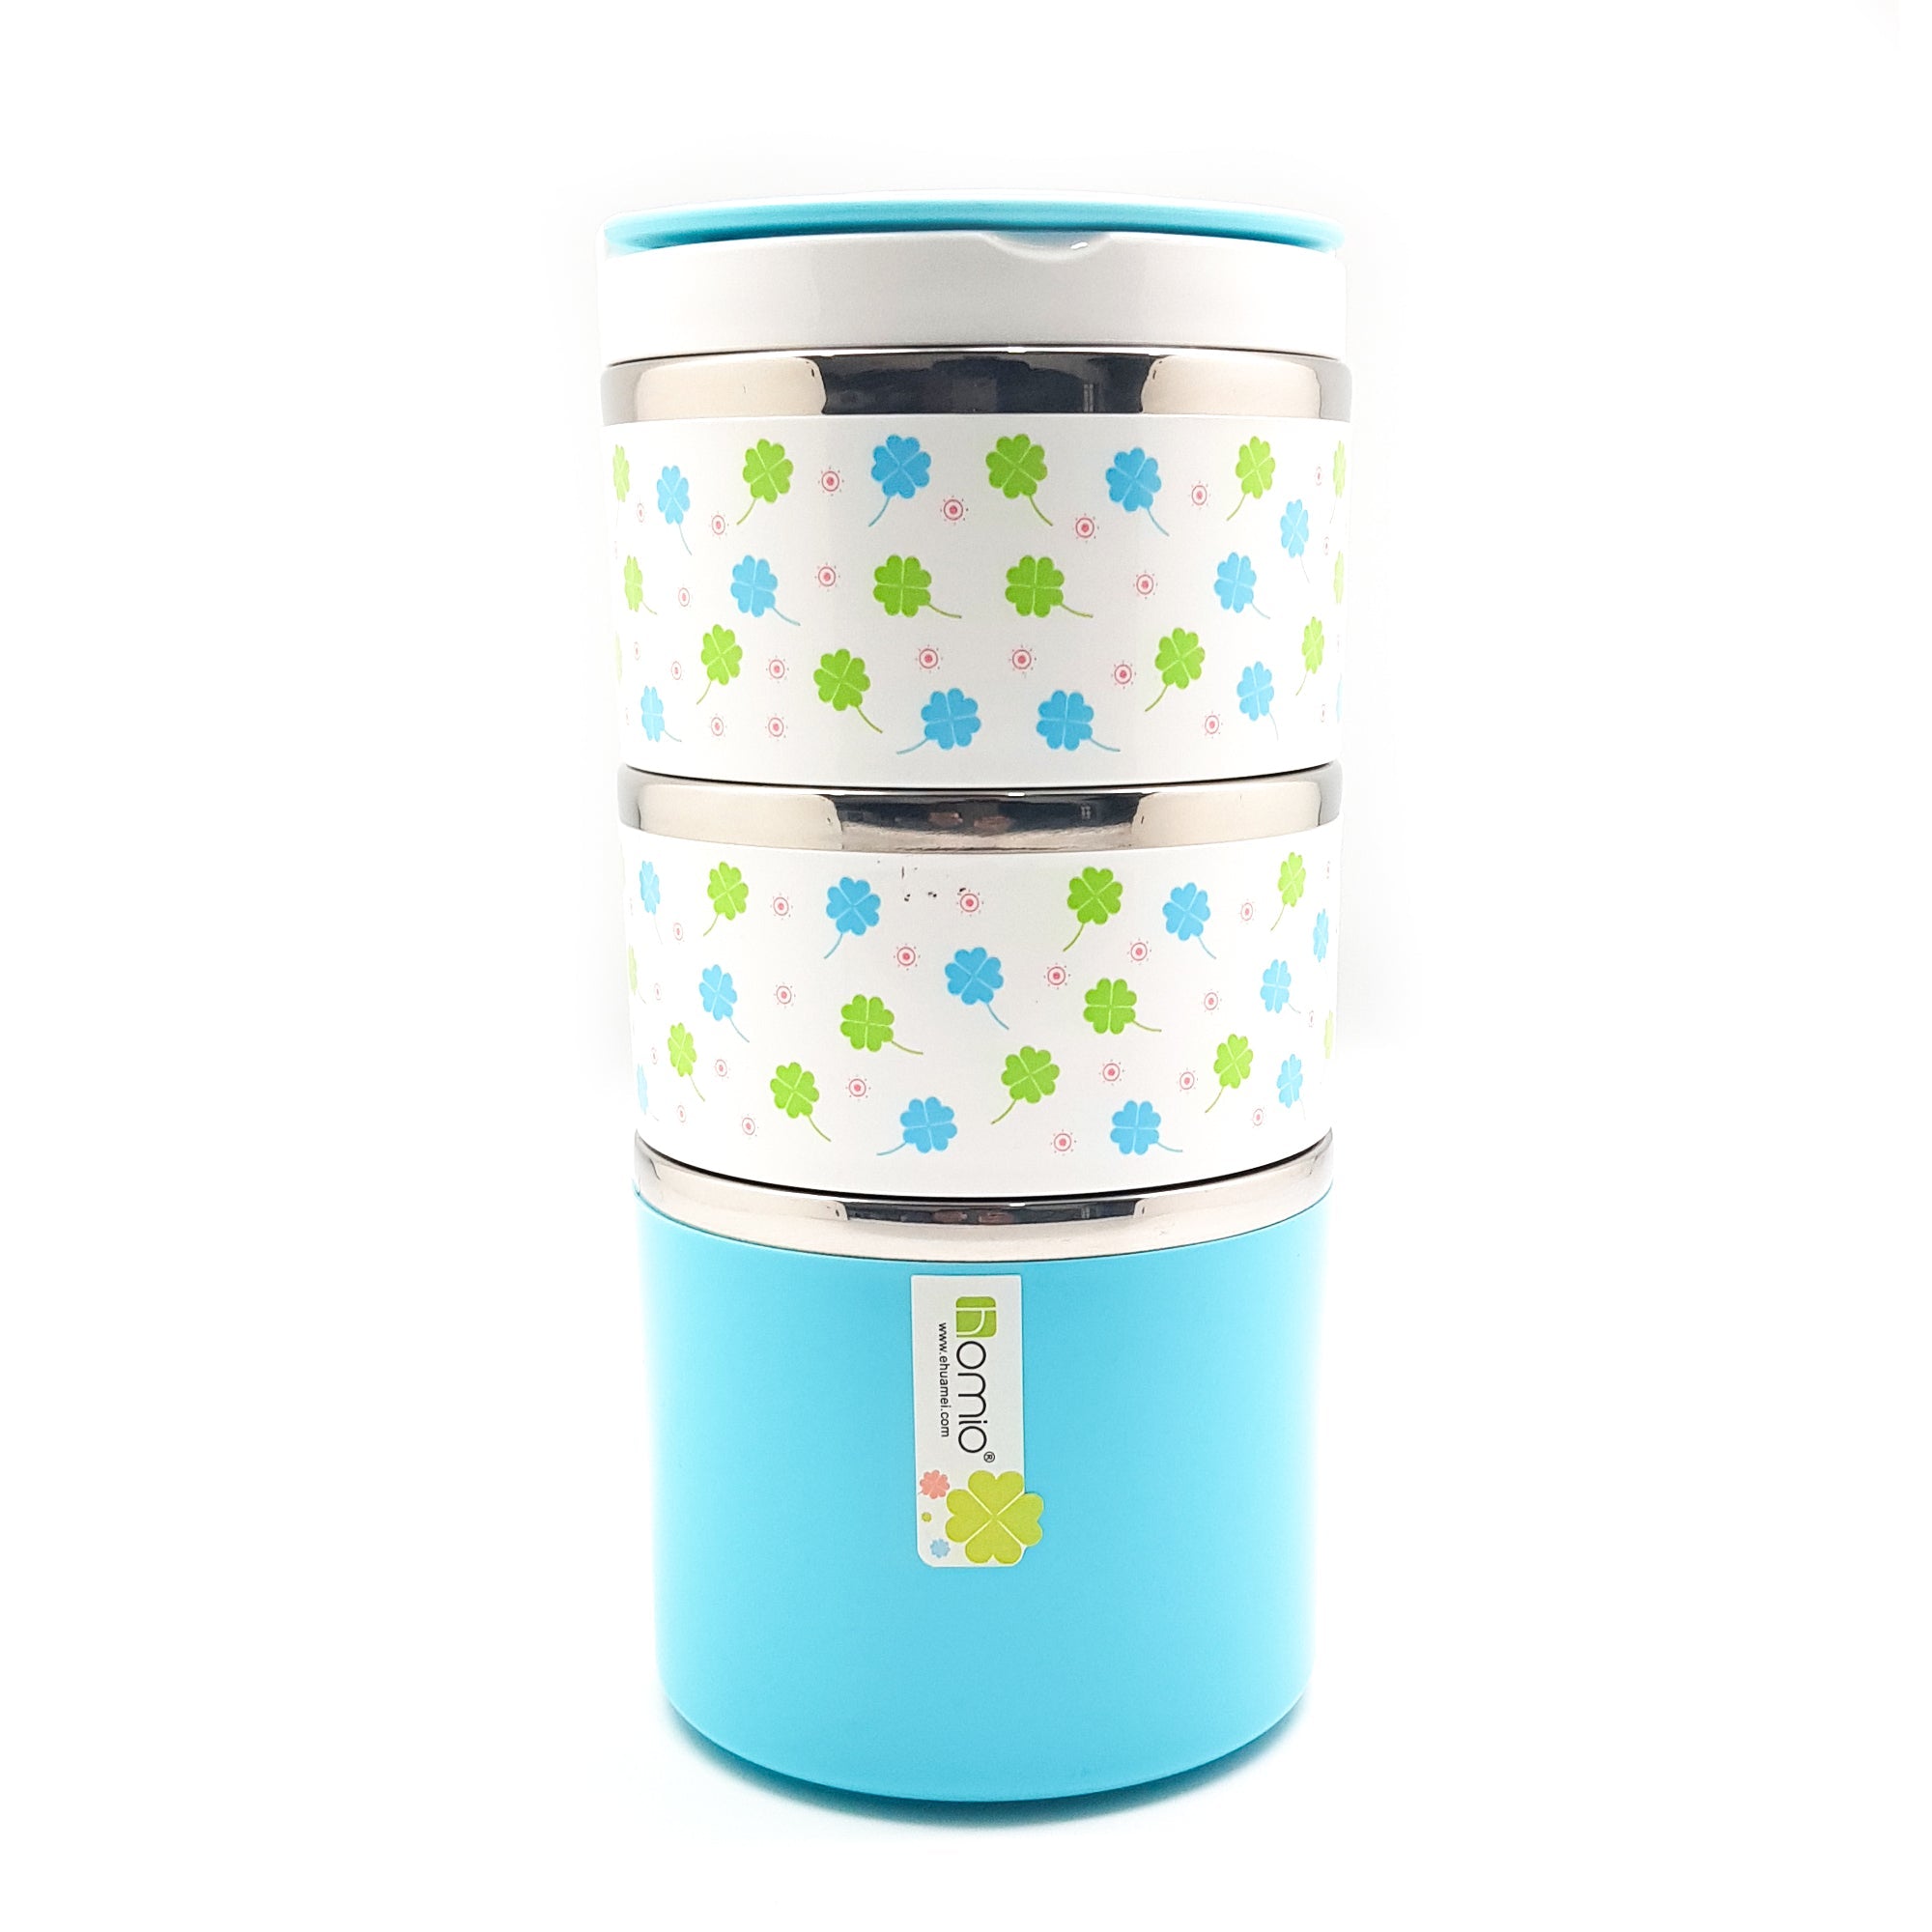 Stainless Steel 3 Layer Storage Insulated Lunch Box 8505